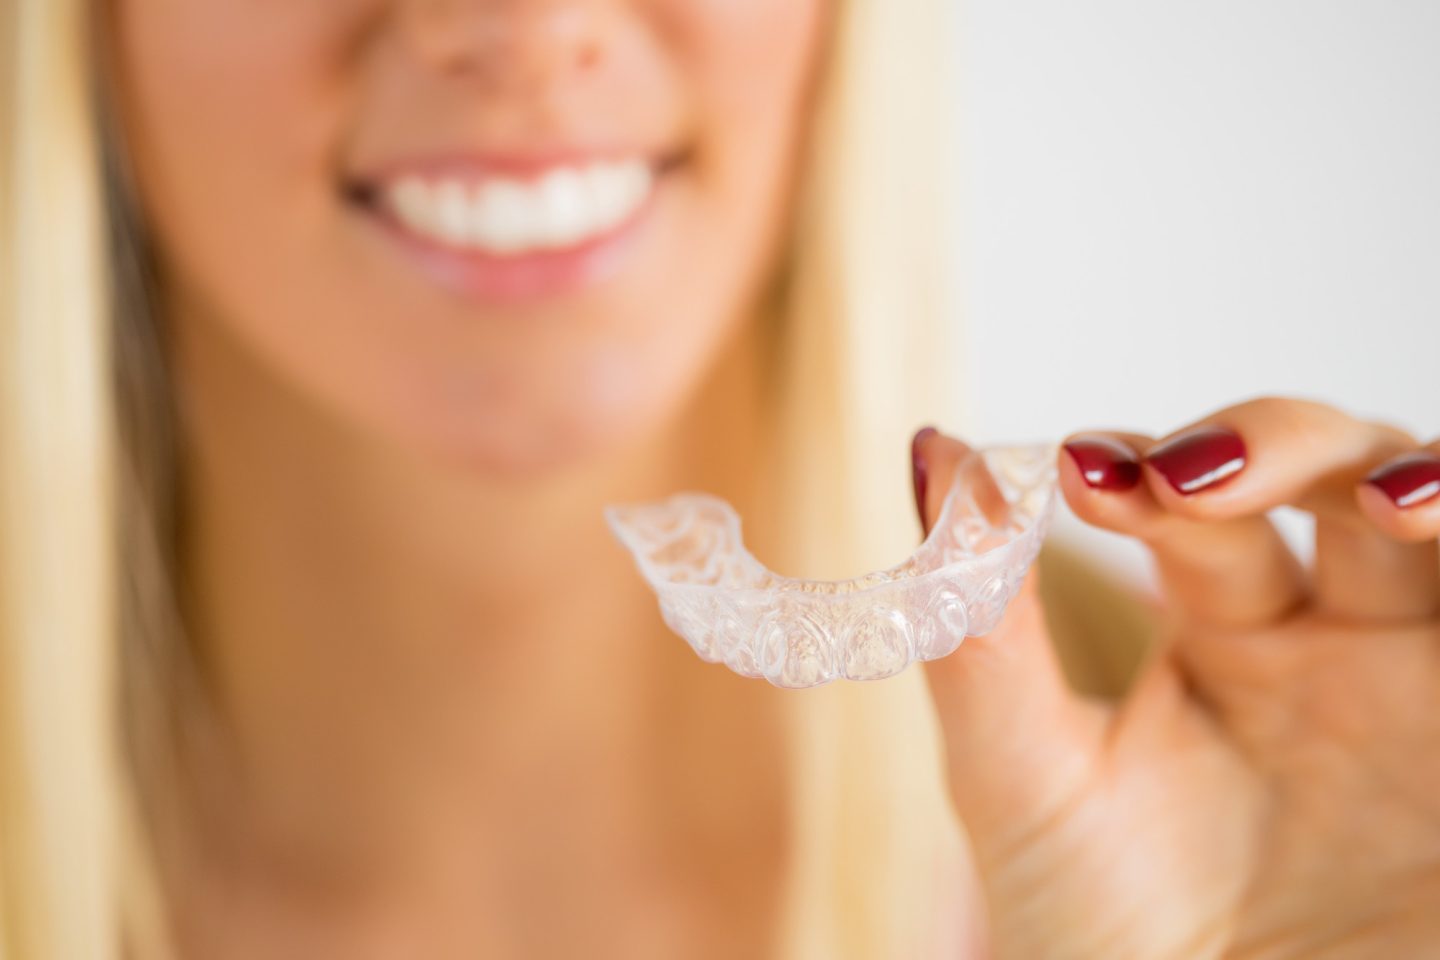 5 Common Invisalign Cleaning Mistakes and How to Avoid Them